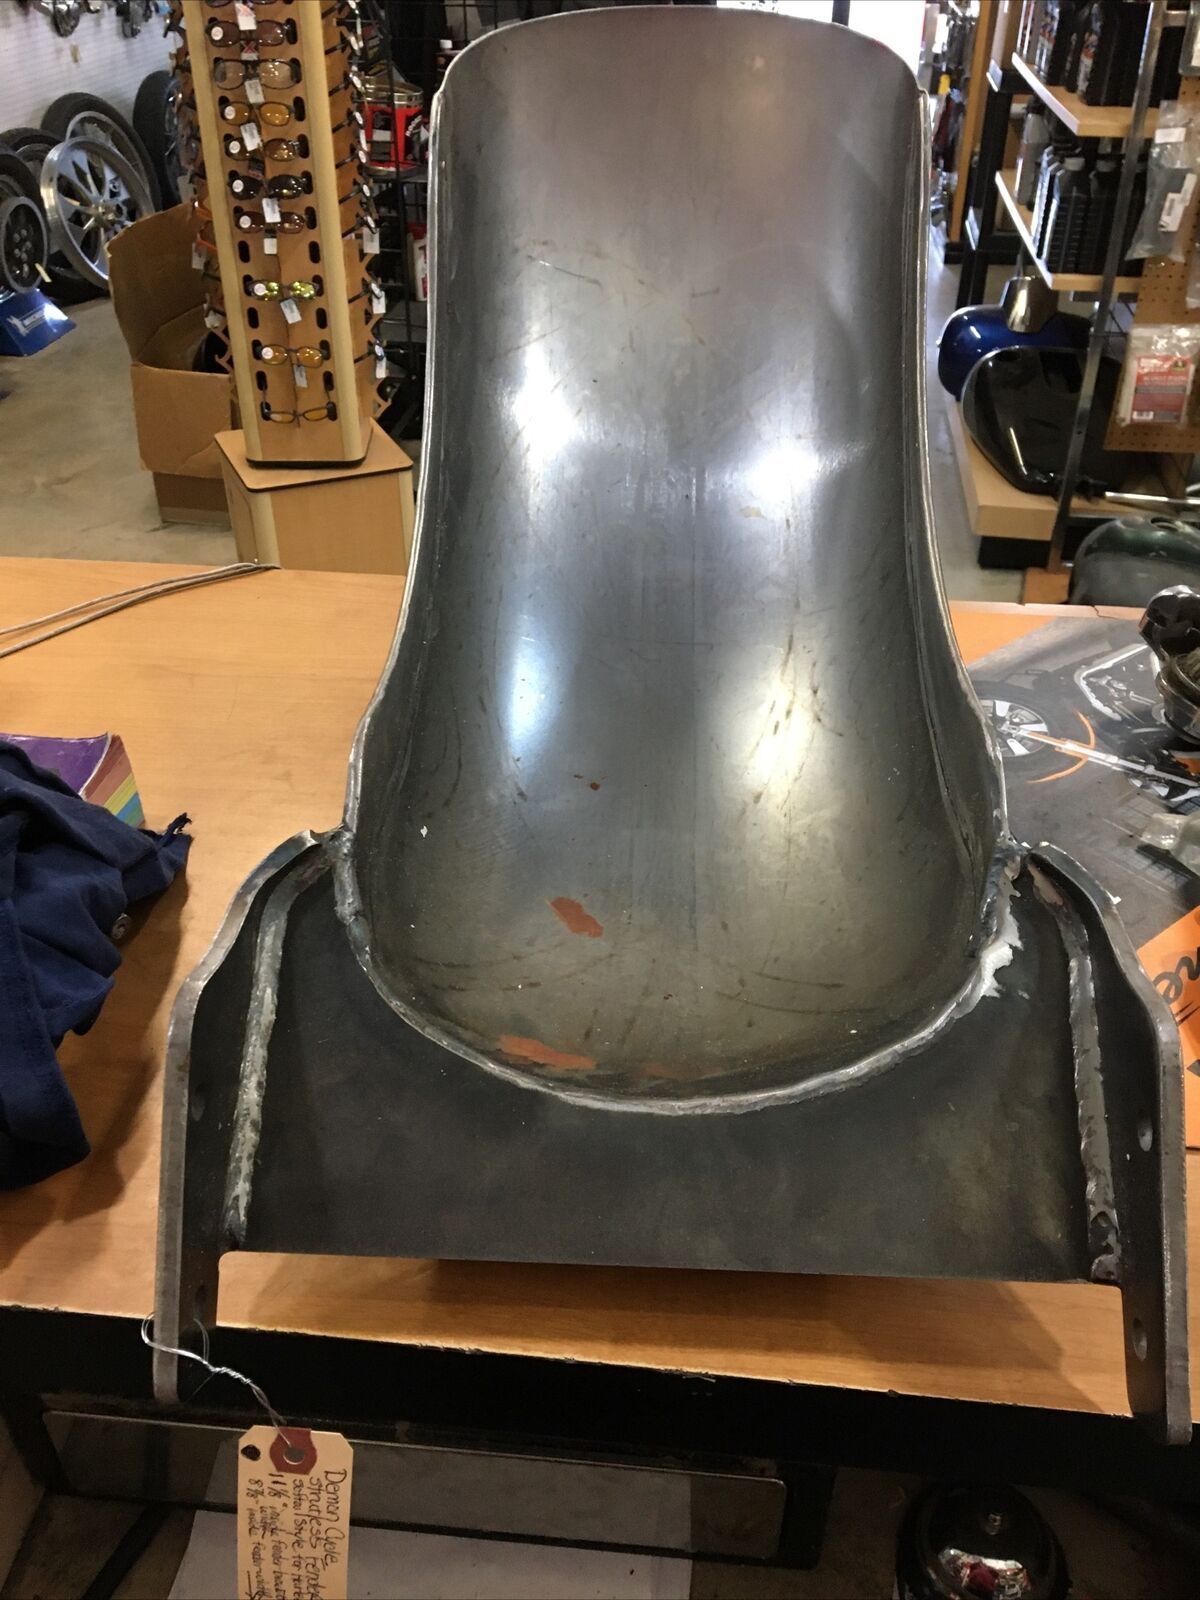 Demon Cycle strutless fender, Custom Demon Cycle Strutless Fender Softail Style for Harley &#8211; Upgrade Your Ride Today!, Knobtown Cycle